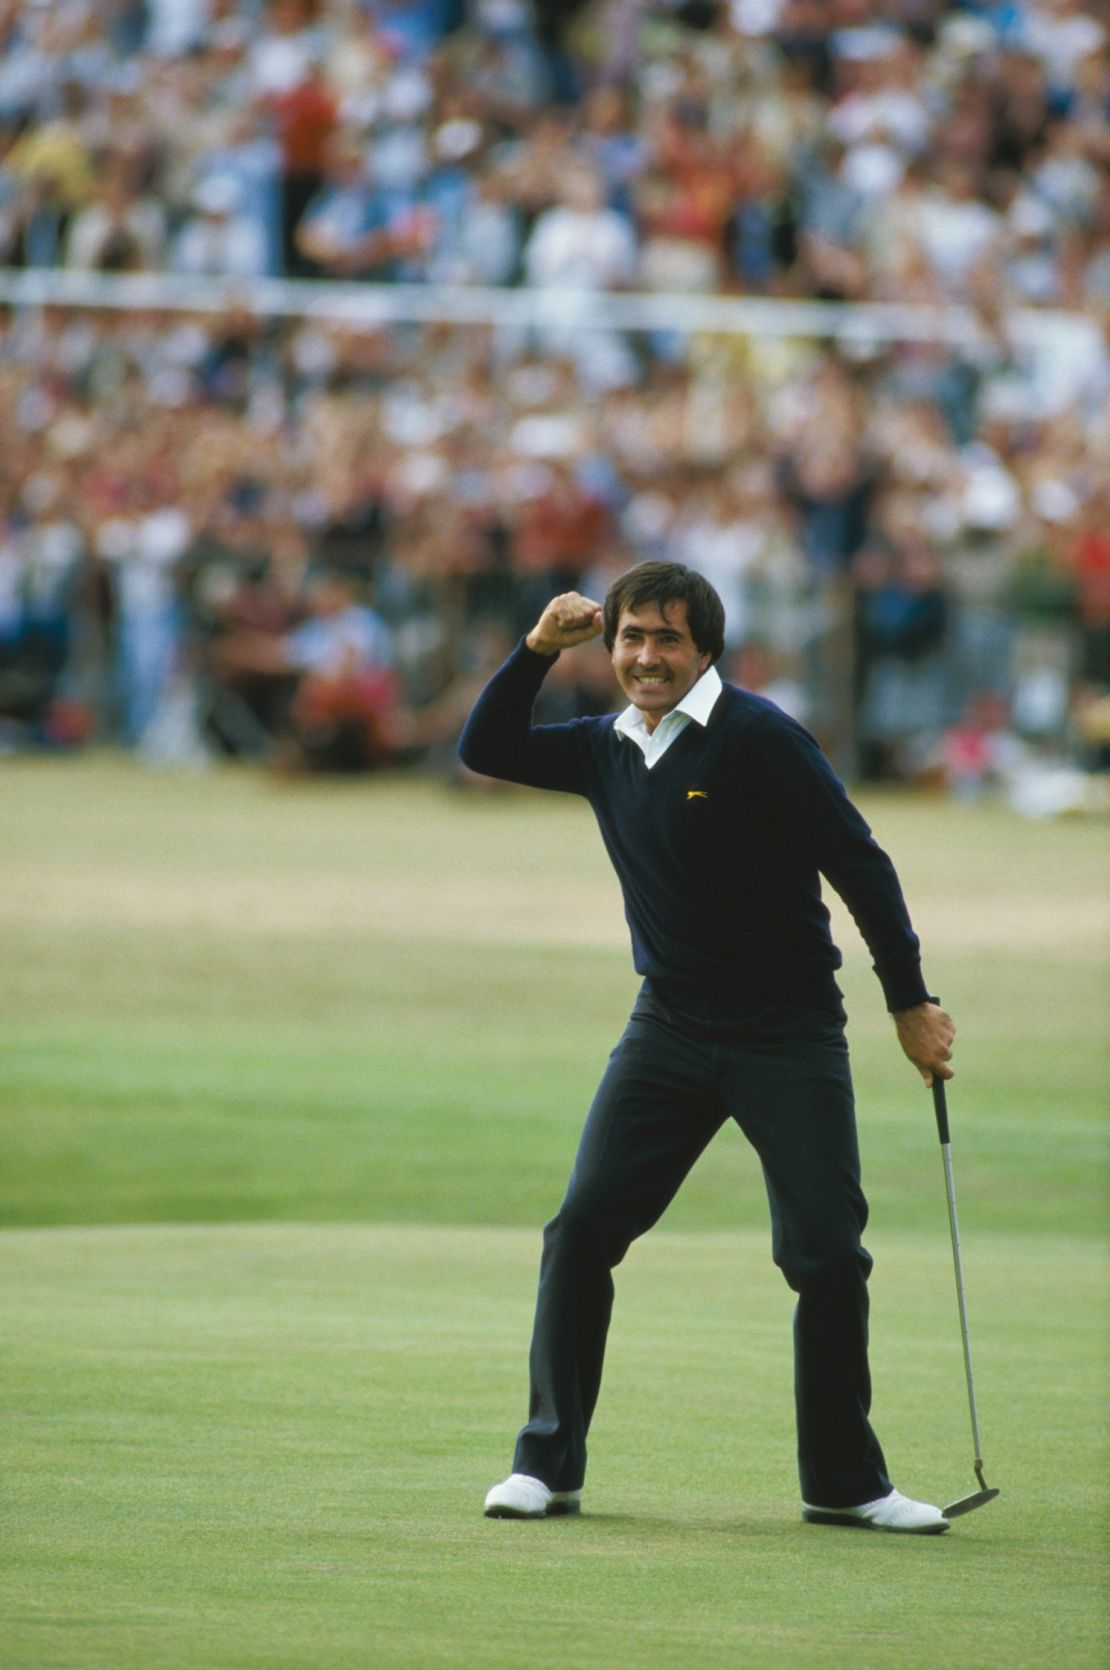 Ballesteros' iconic celebration in St. Andrews in 1984, captured by Cannon.